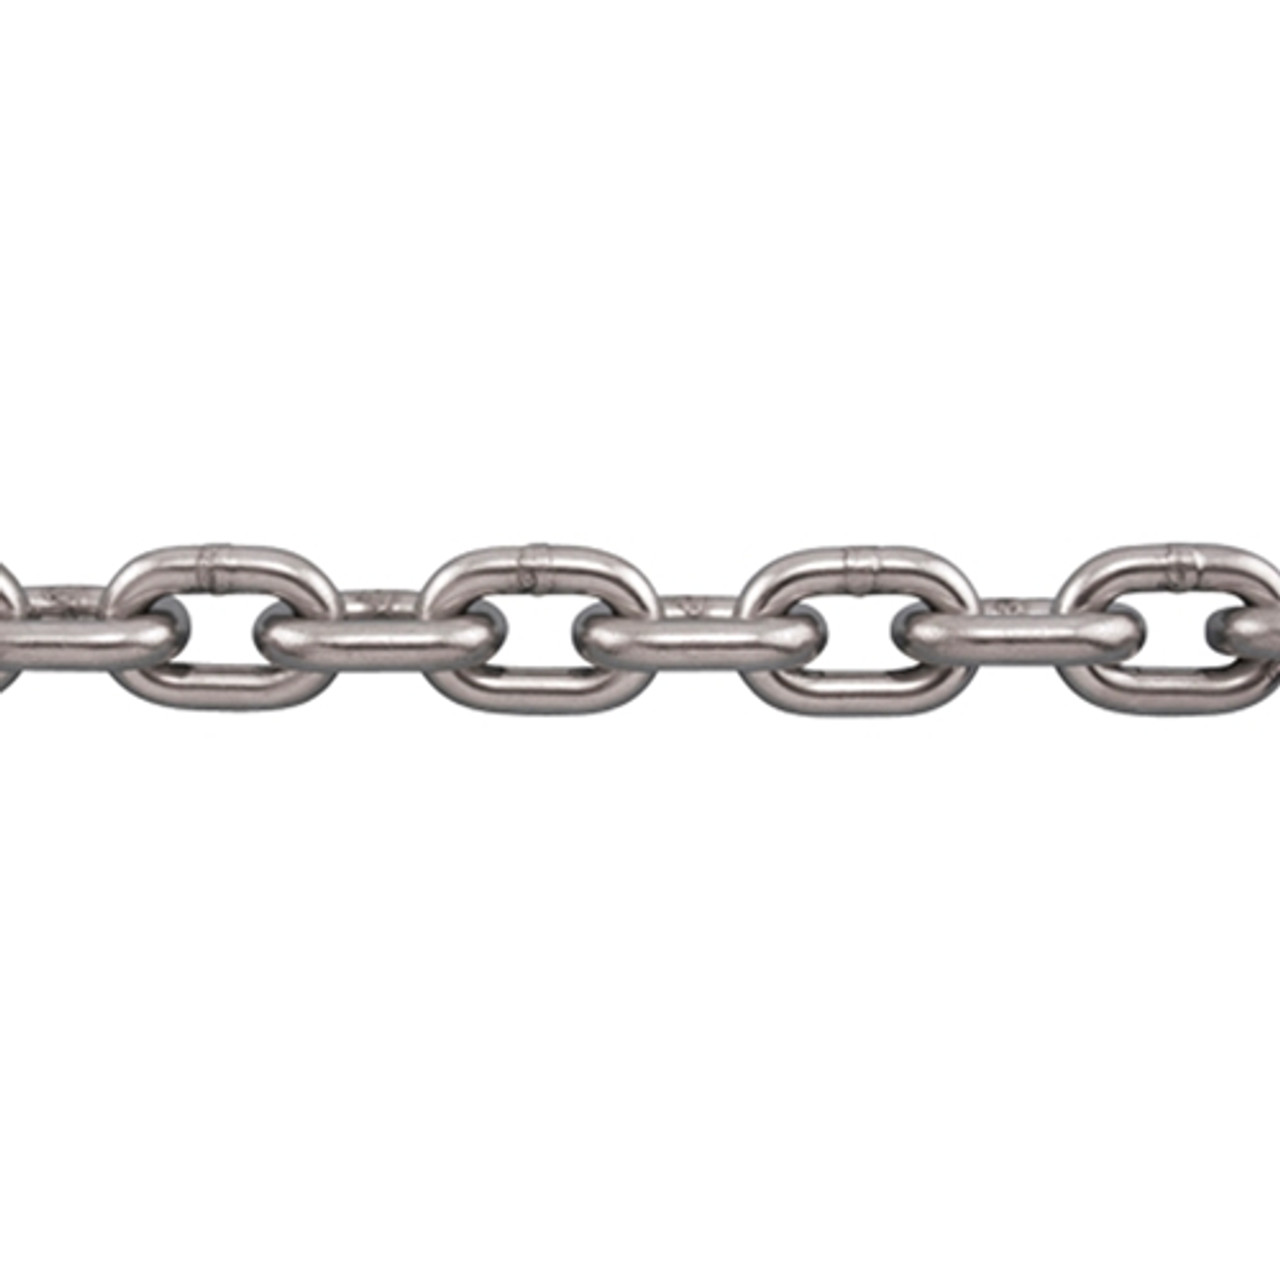 Stainless Steel Lifting Chain in.S5 in. 316L